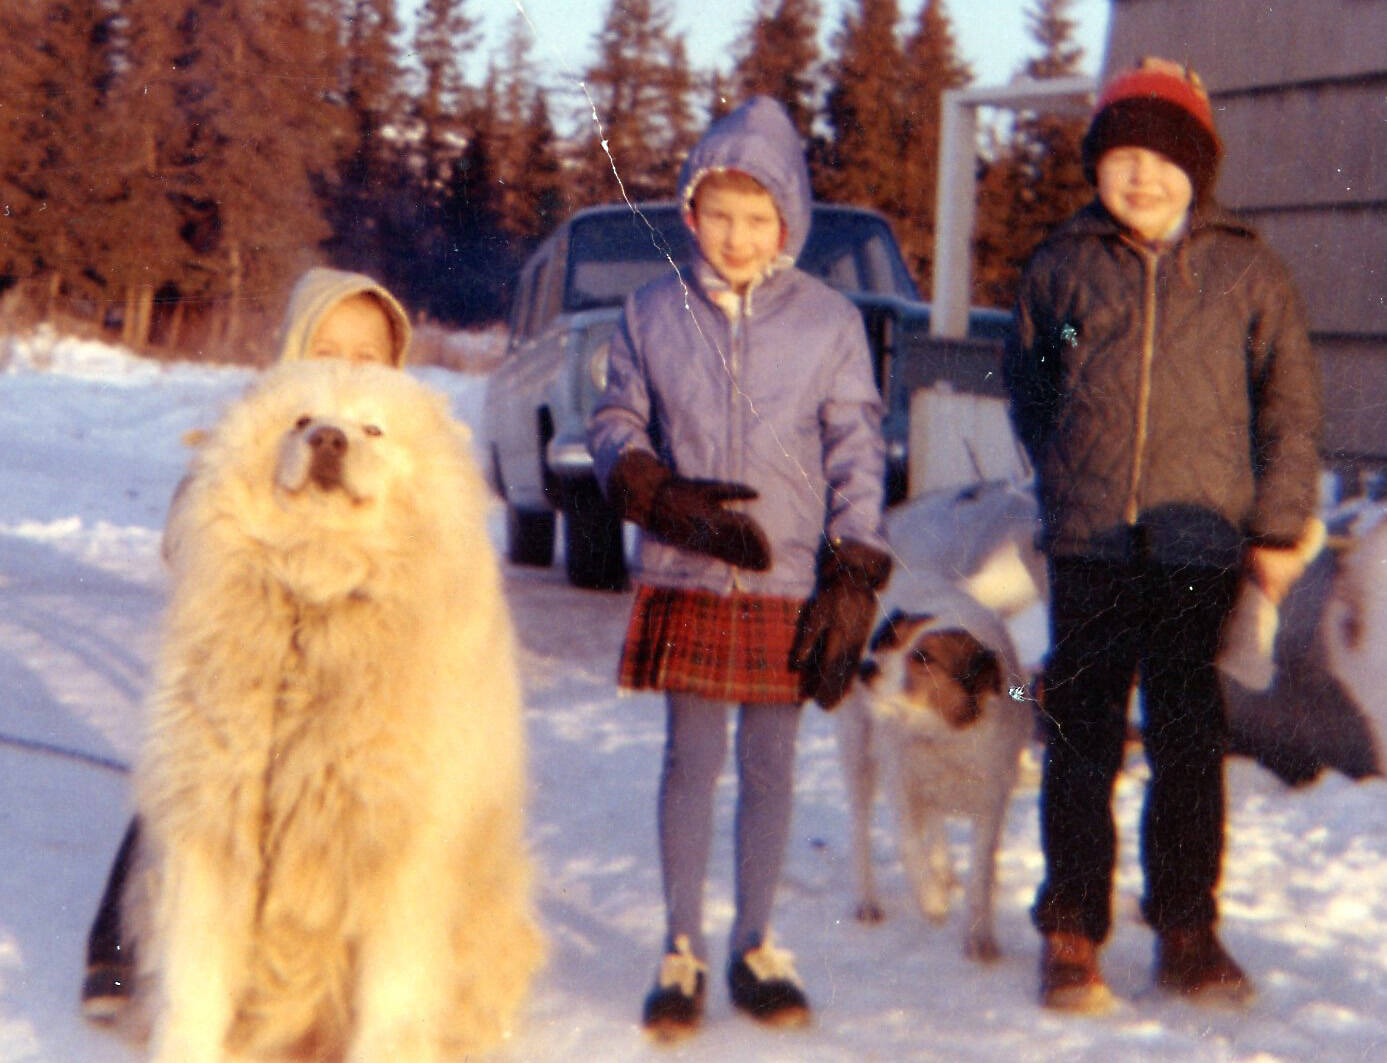 The Fenger children (Peter, at left, behind the dog, Heidi and Eric) pose near their home on the Homer bluff near the airport. Their dogs were Hartford (L) and Flojo. (Photo courtesy of the Fenger Family Collection)